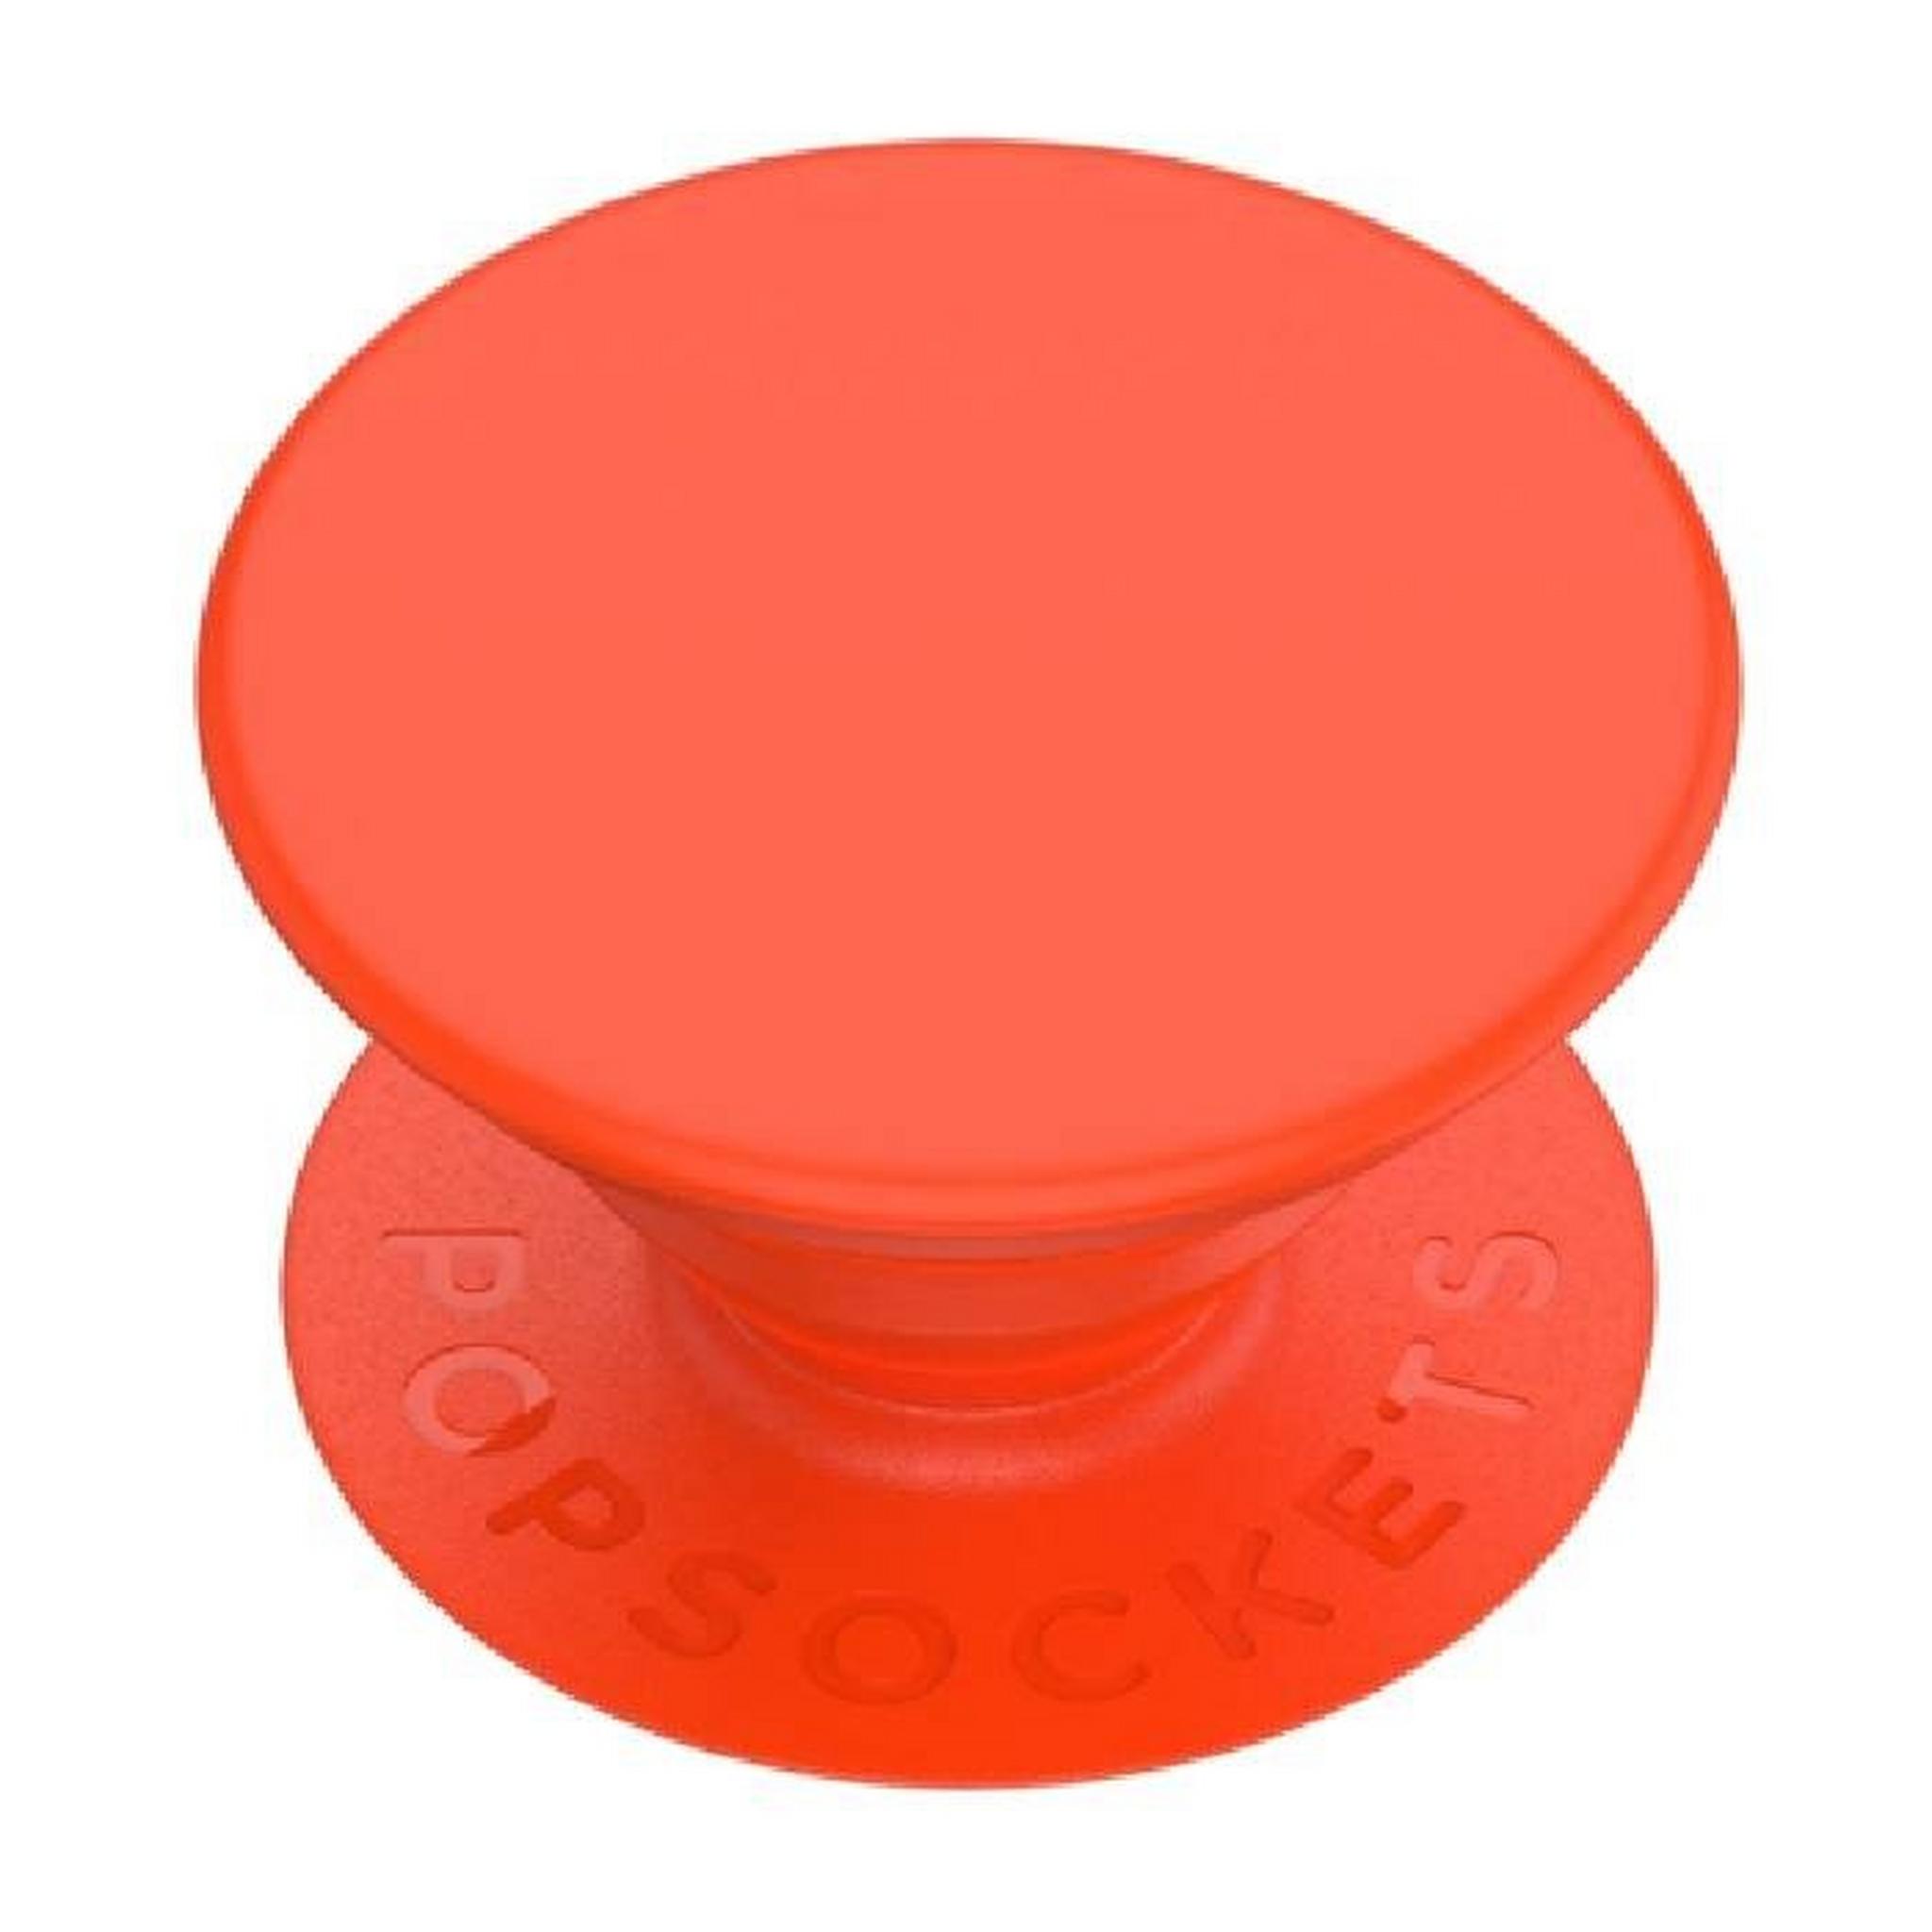 PopSockets Phone Stand and Grip (802458) – Neon Electric Orange